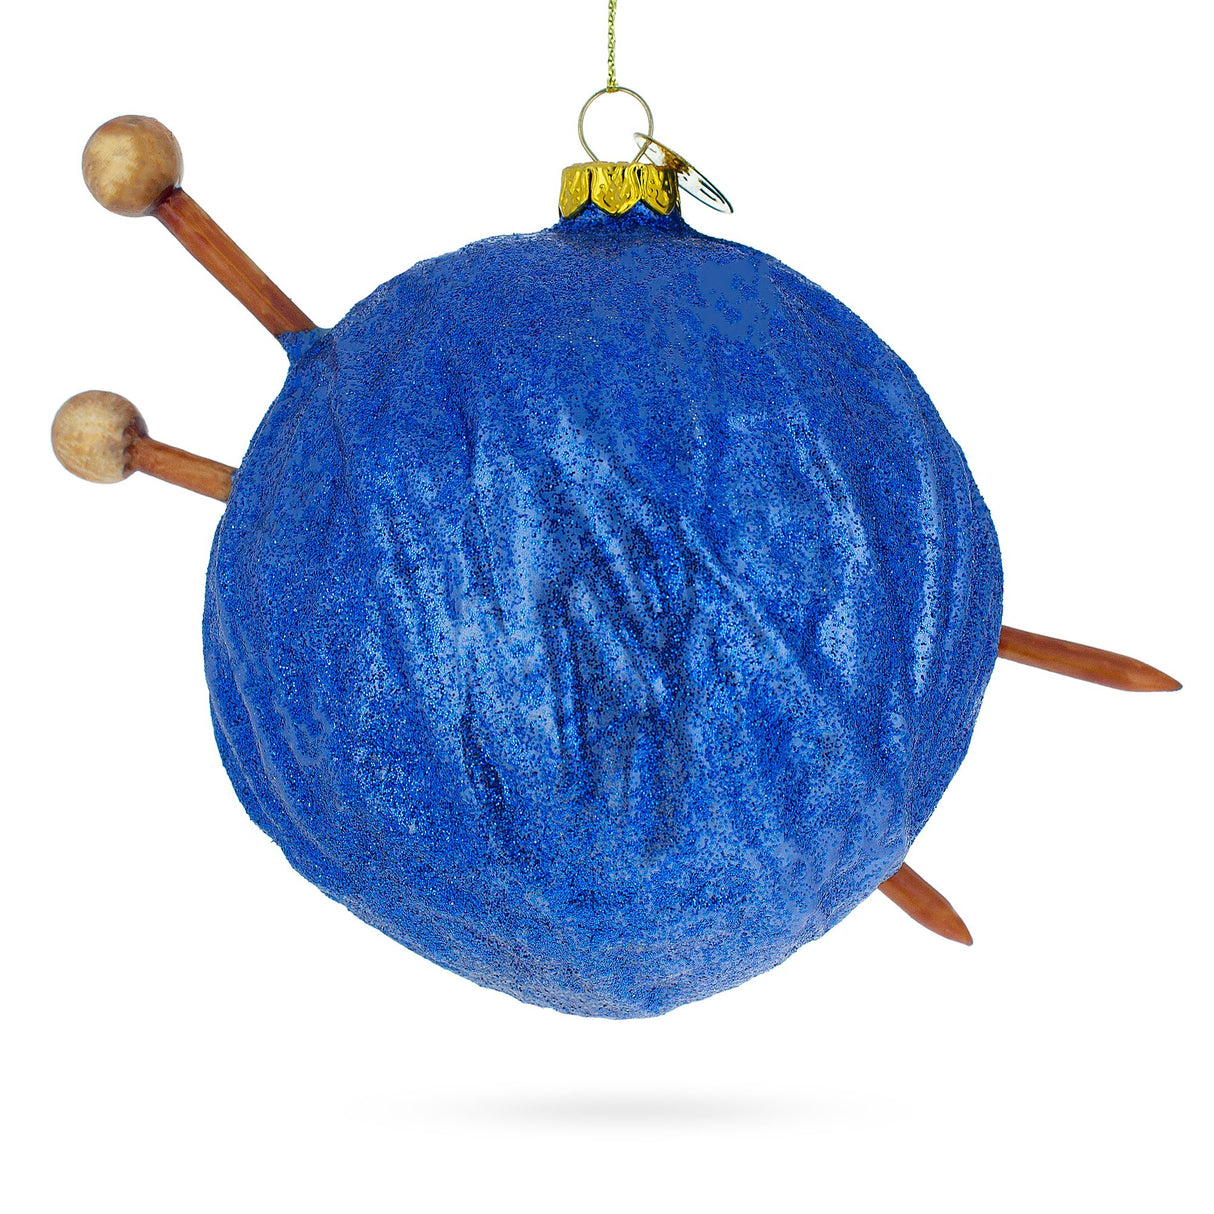 Blue Yarn Ball and Sticks - Blown Glass Christmas Ornament in Blue color, Round shape